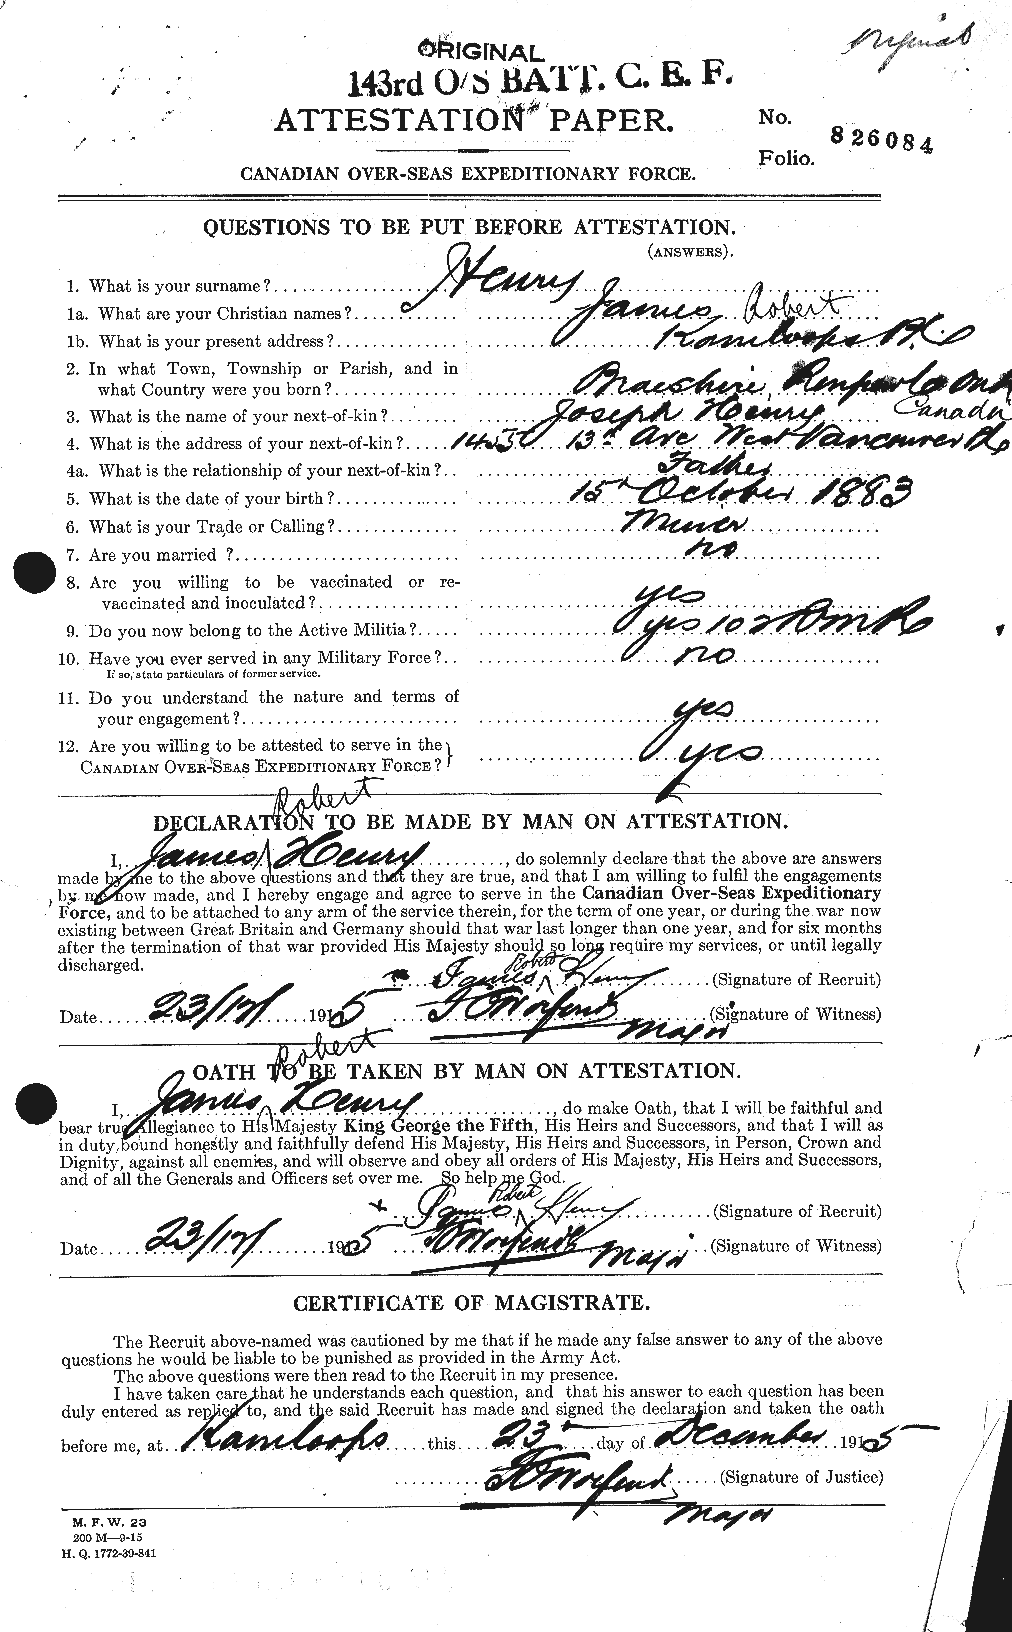 Personnel Records of the First World War - CEF 387599a